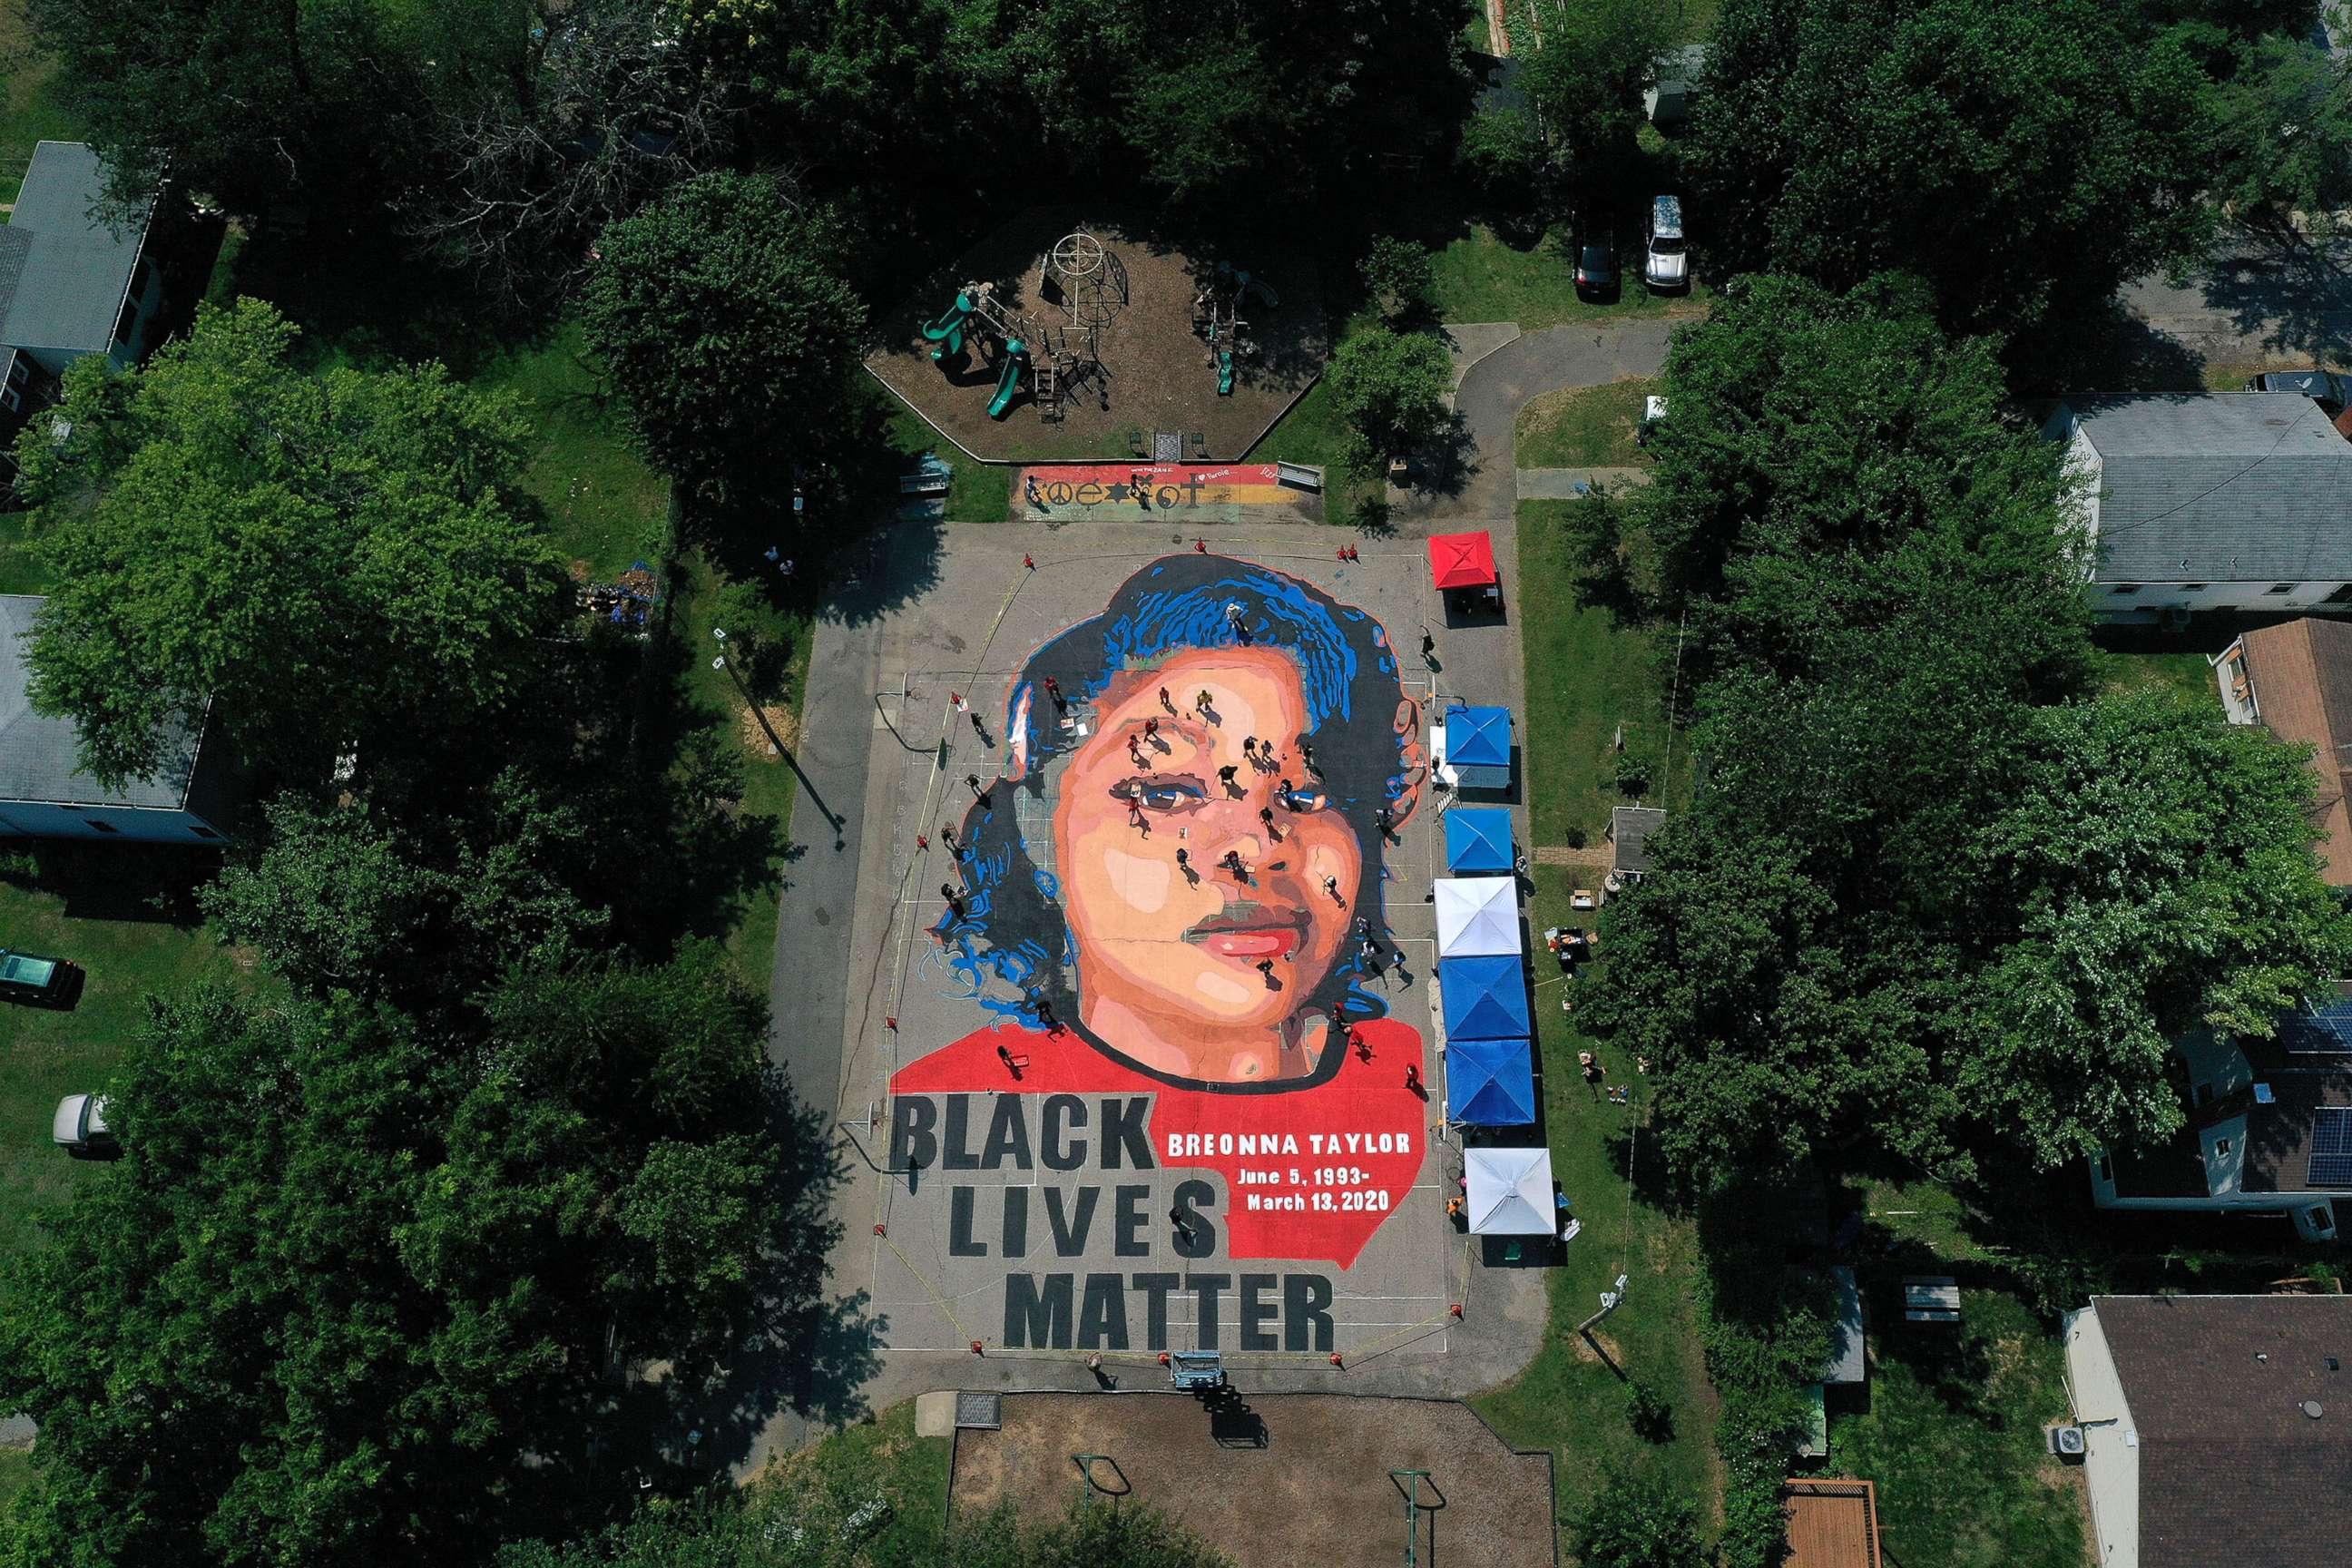 PHOTO: In an aerial view from a drone, a large-scale ground mural depicting Breonna Taylor with the text 'Black Lives Matter' is seen being painted at Chambers Park on July 5, 2020, in Annapolis, Md.